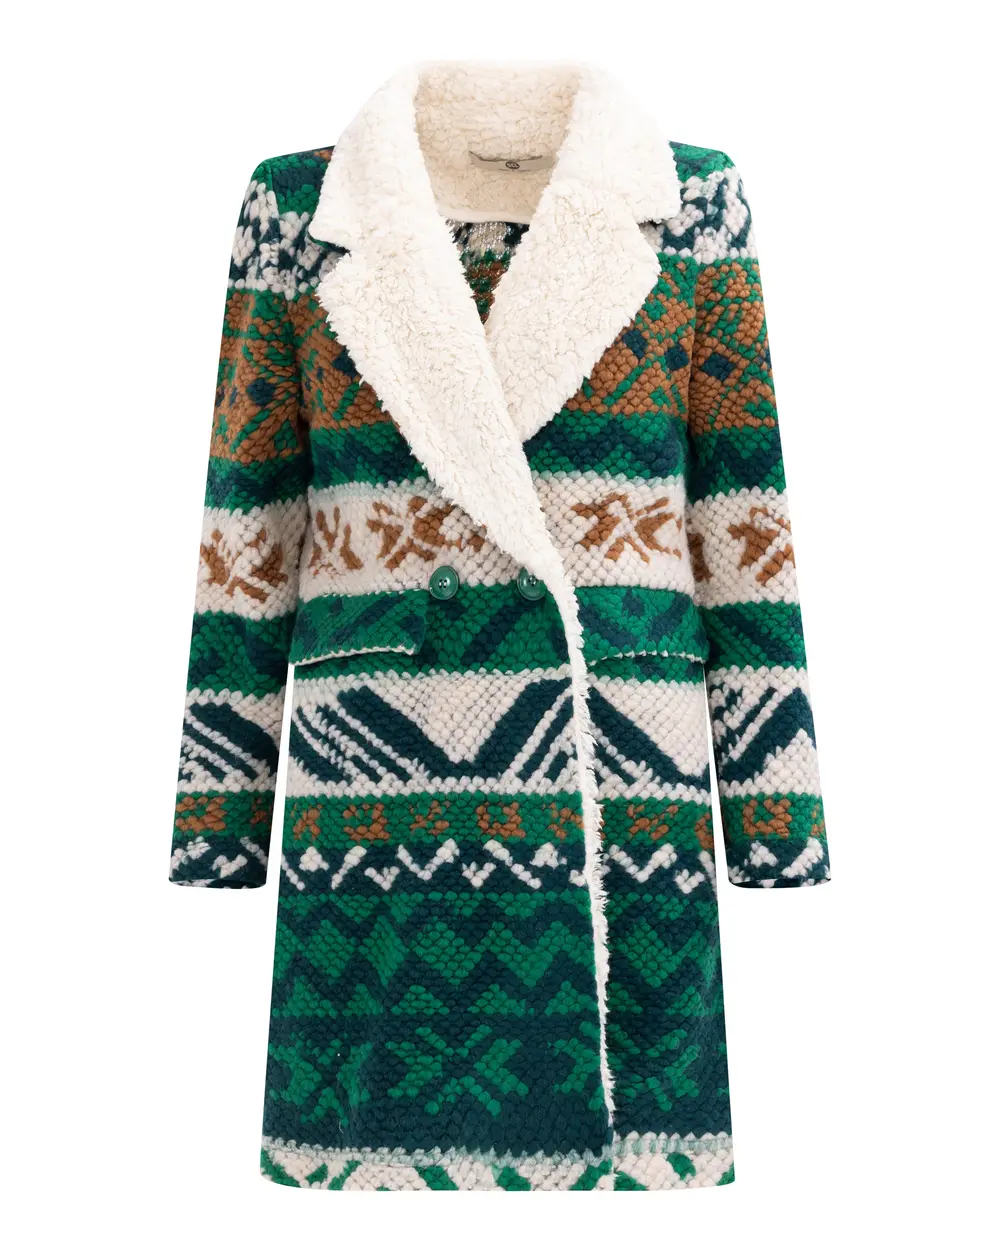 Mixed Patterned Plush Coat with Pockets